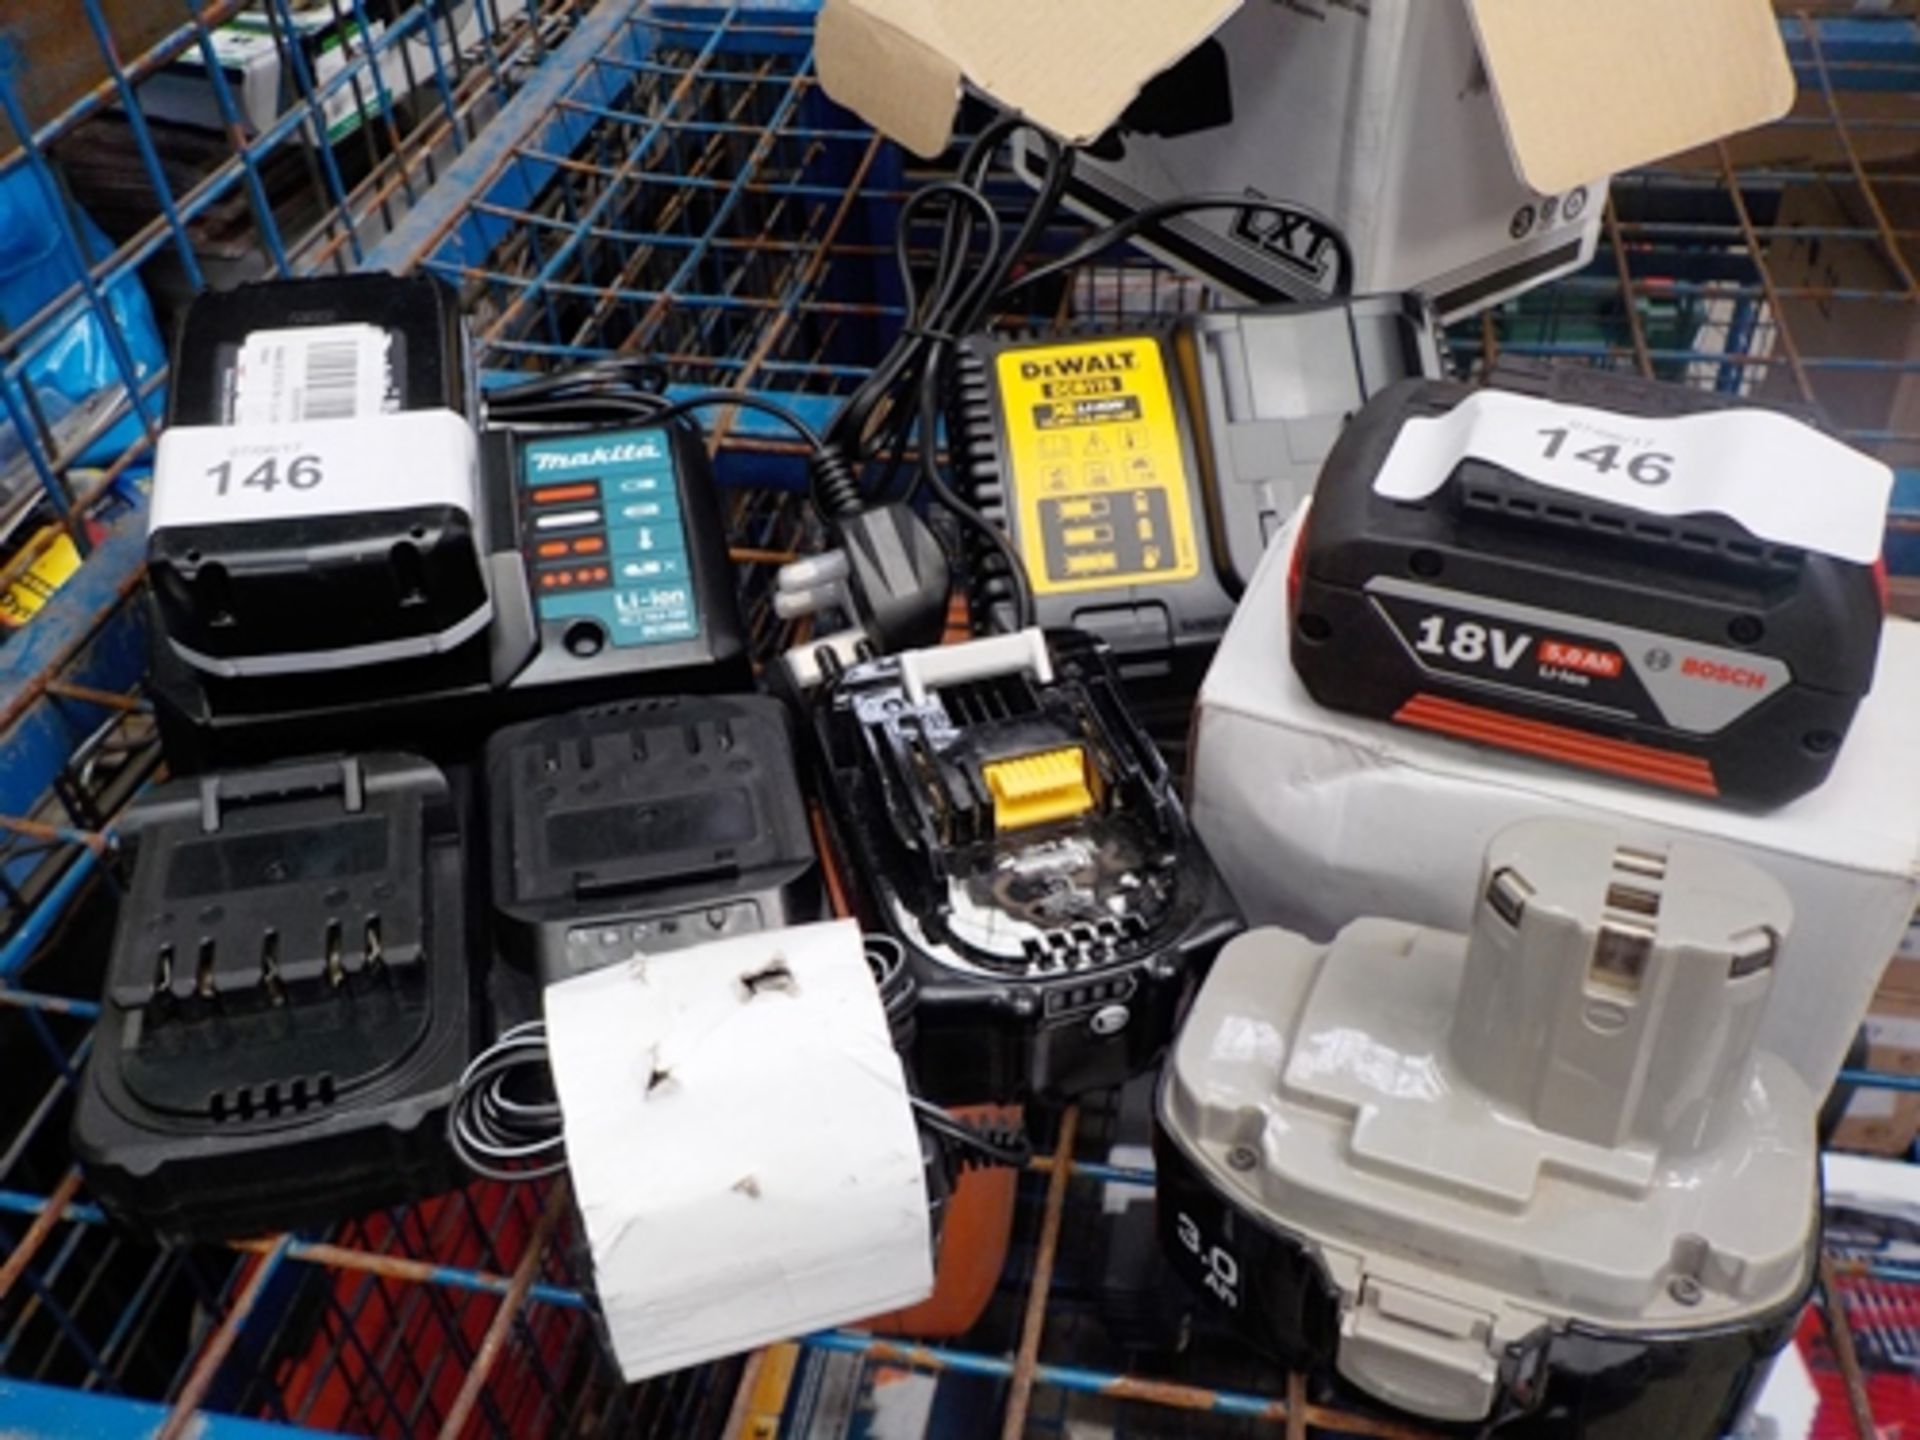 A selection of tool batteries and chargers including 1 x Makita 14.4-18V charger, model DC18WA and 1